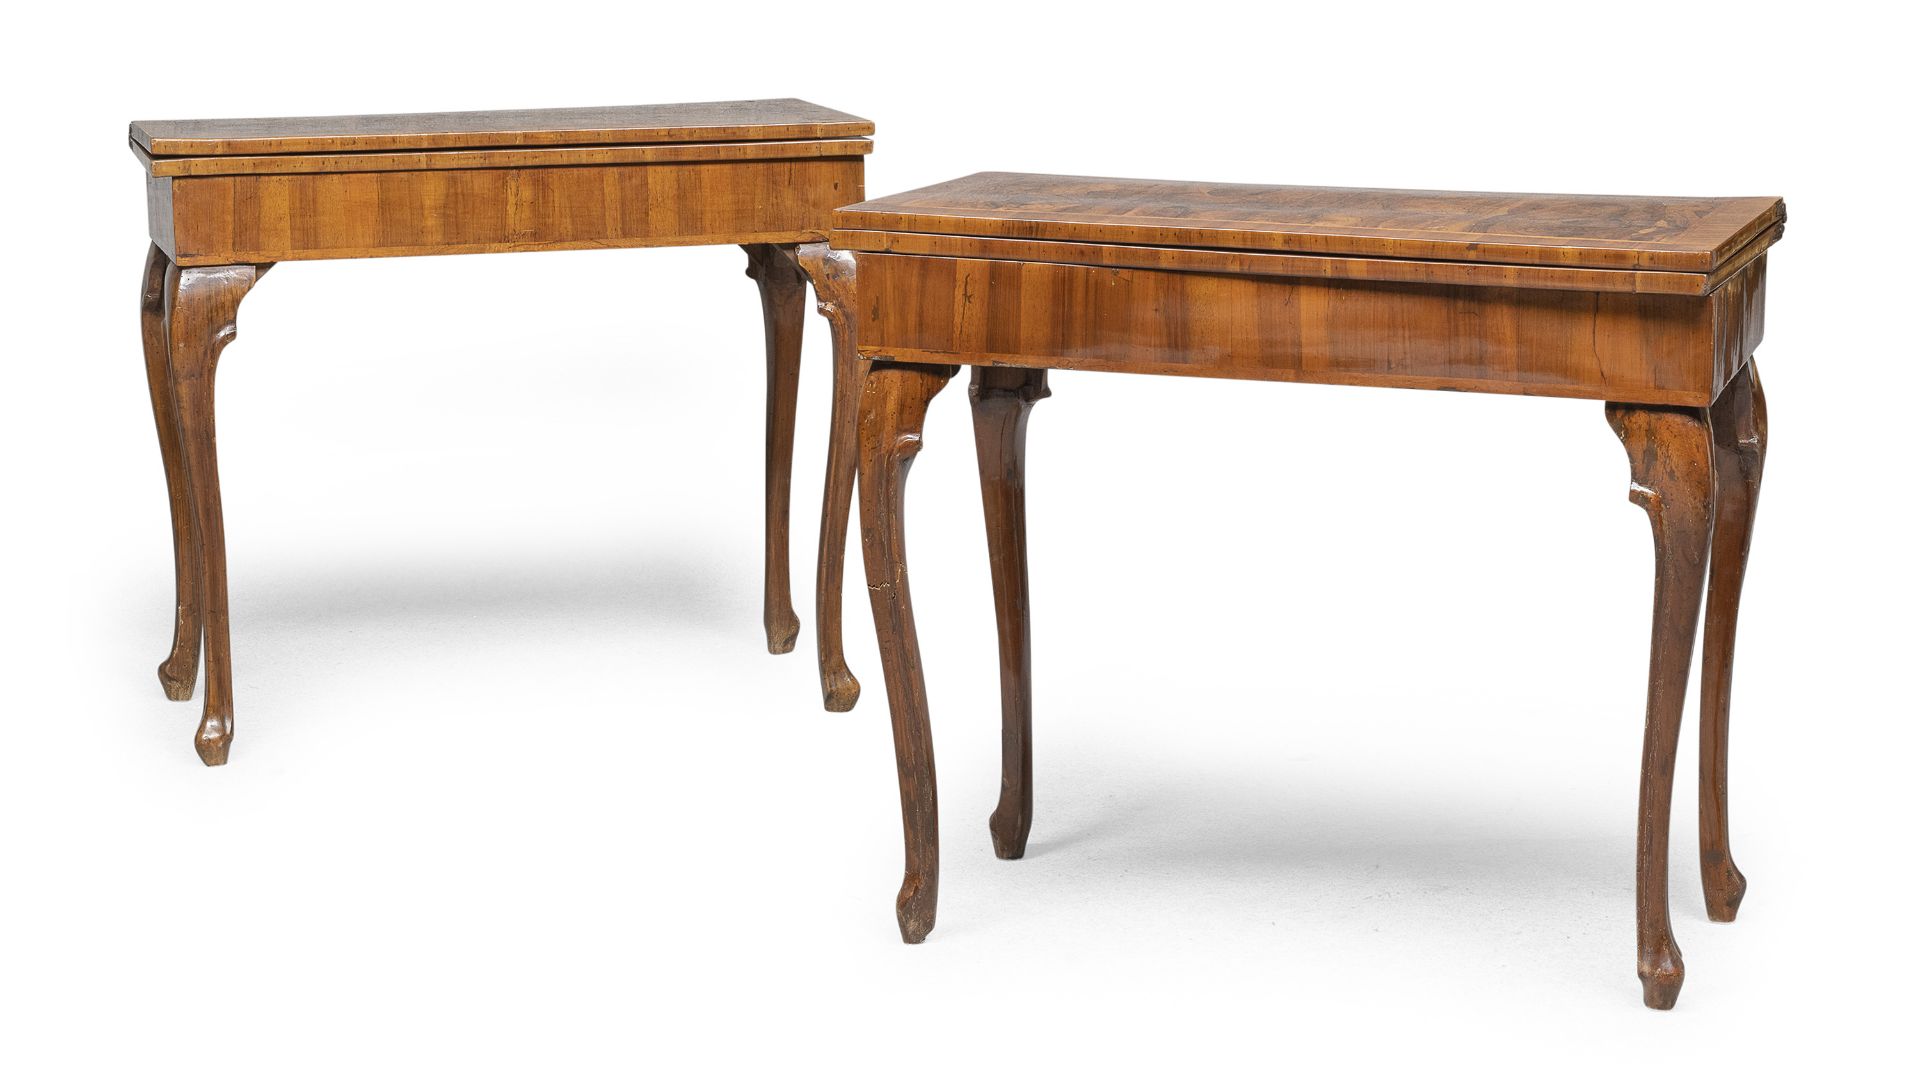 PAIR OF CHERRY GAMES TABLES PROBABLY EMILIA 18TH CENTURY